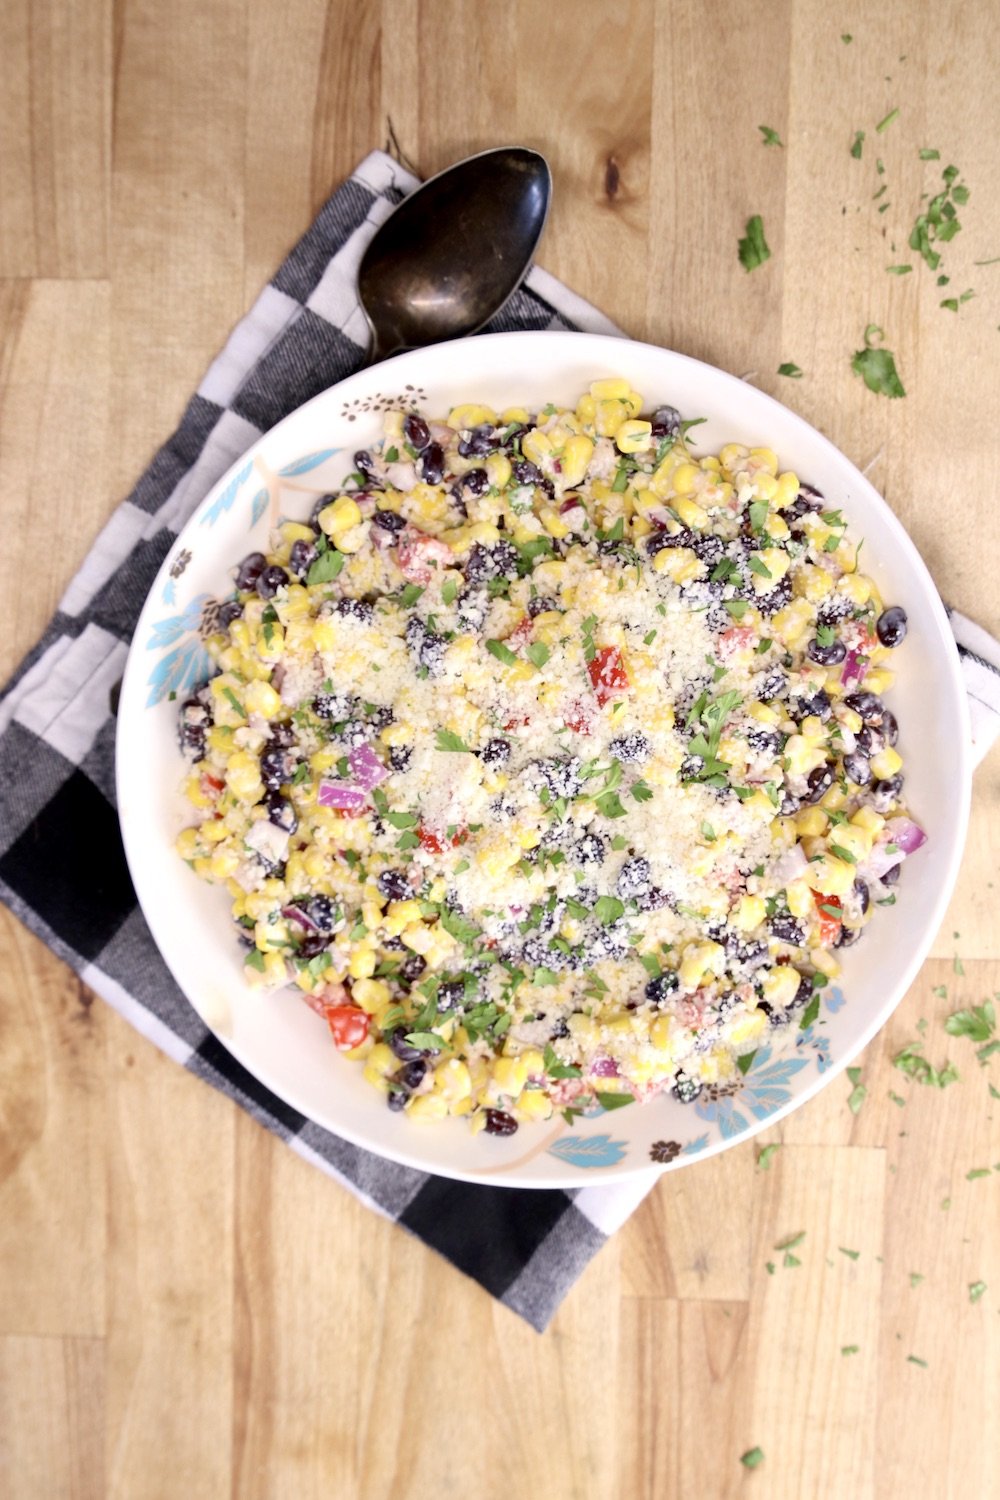 Black bean and corn salad in a bowl on a black and white check napkin